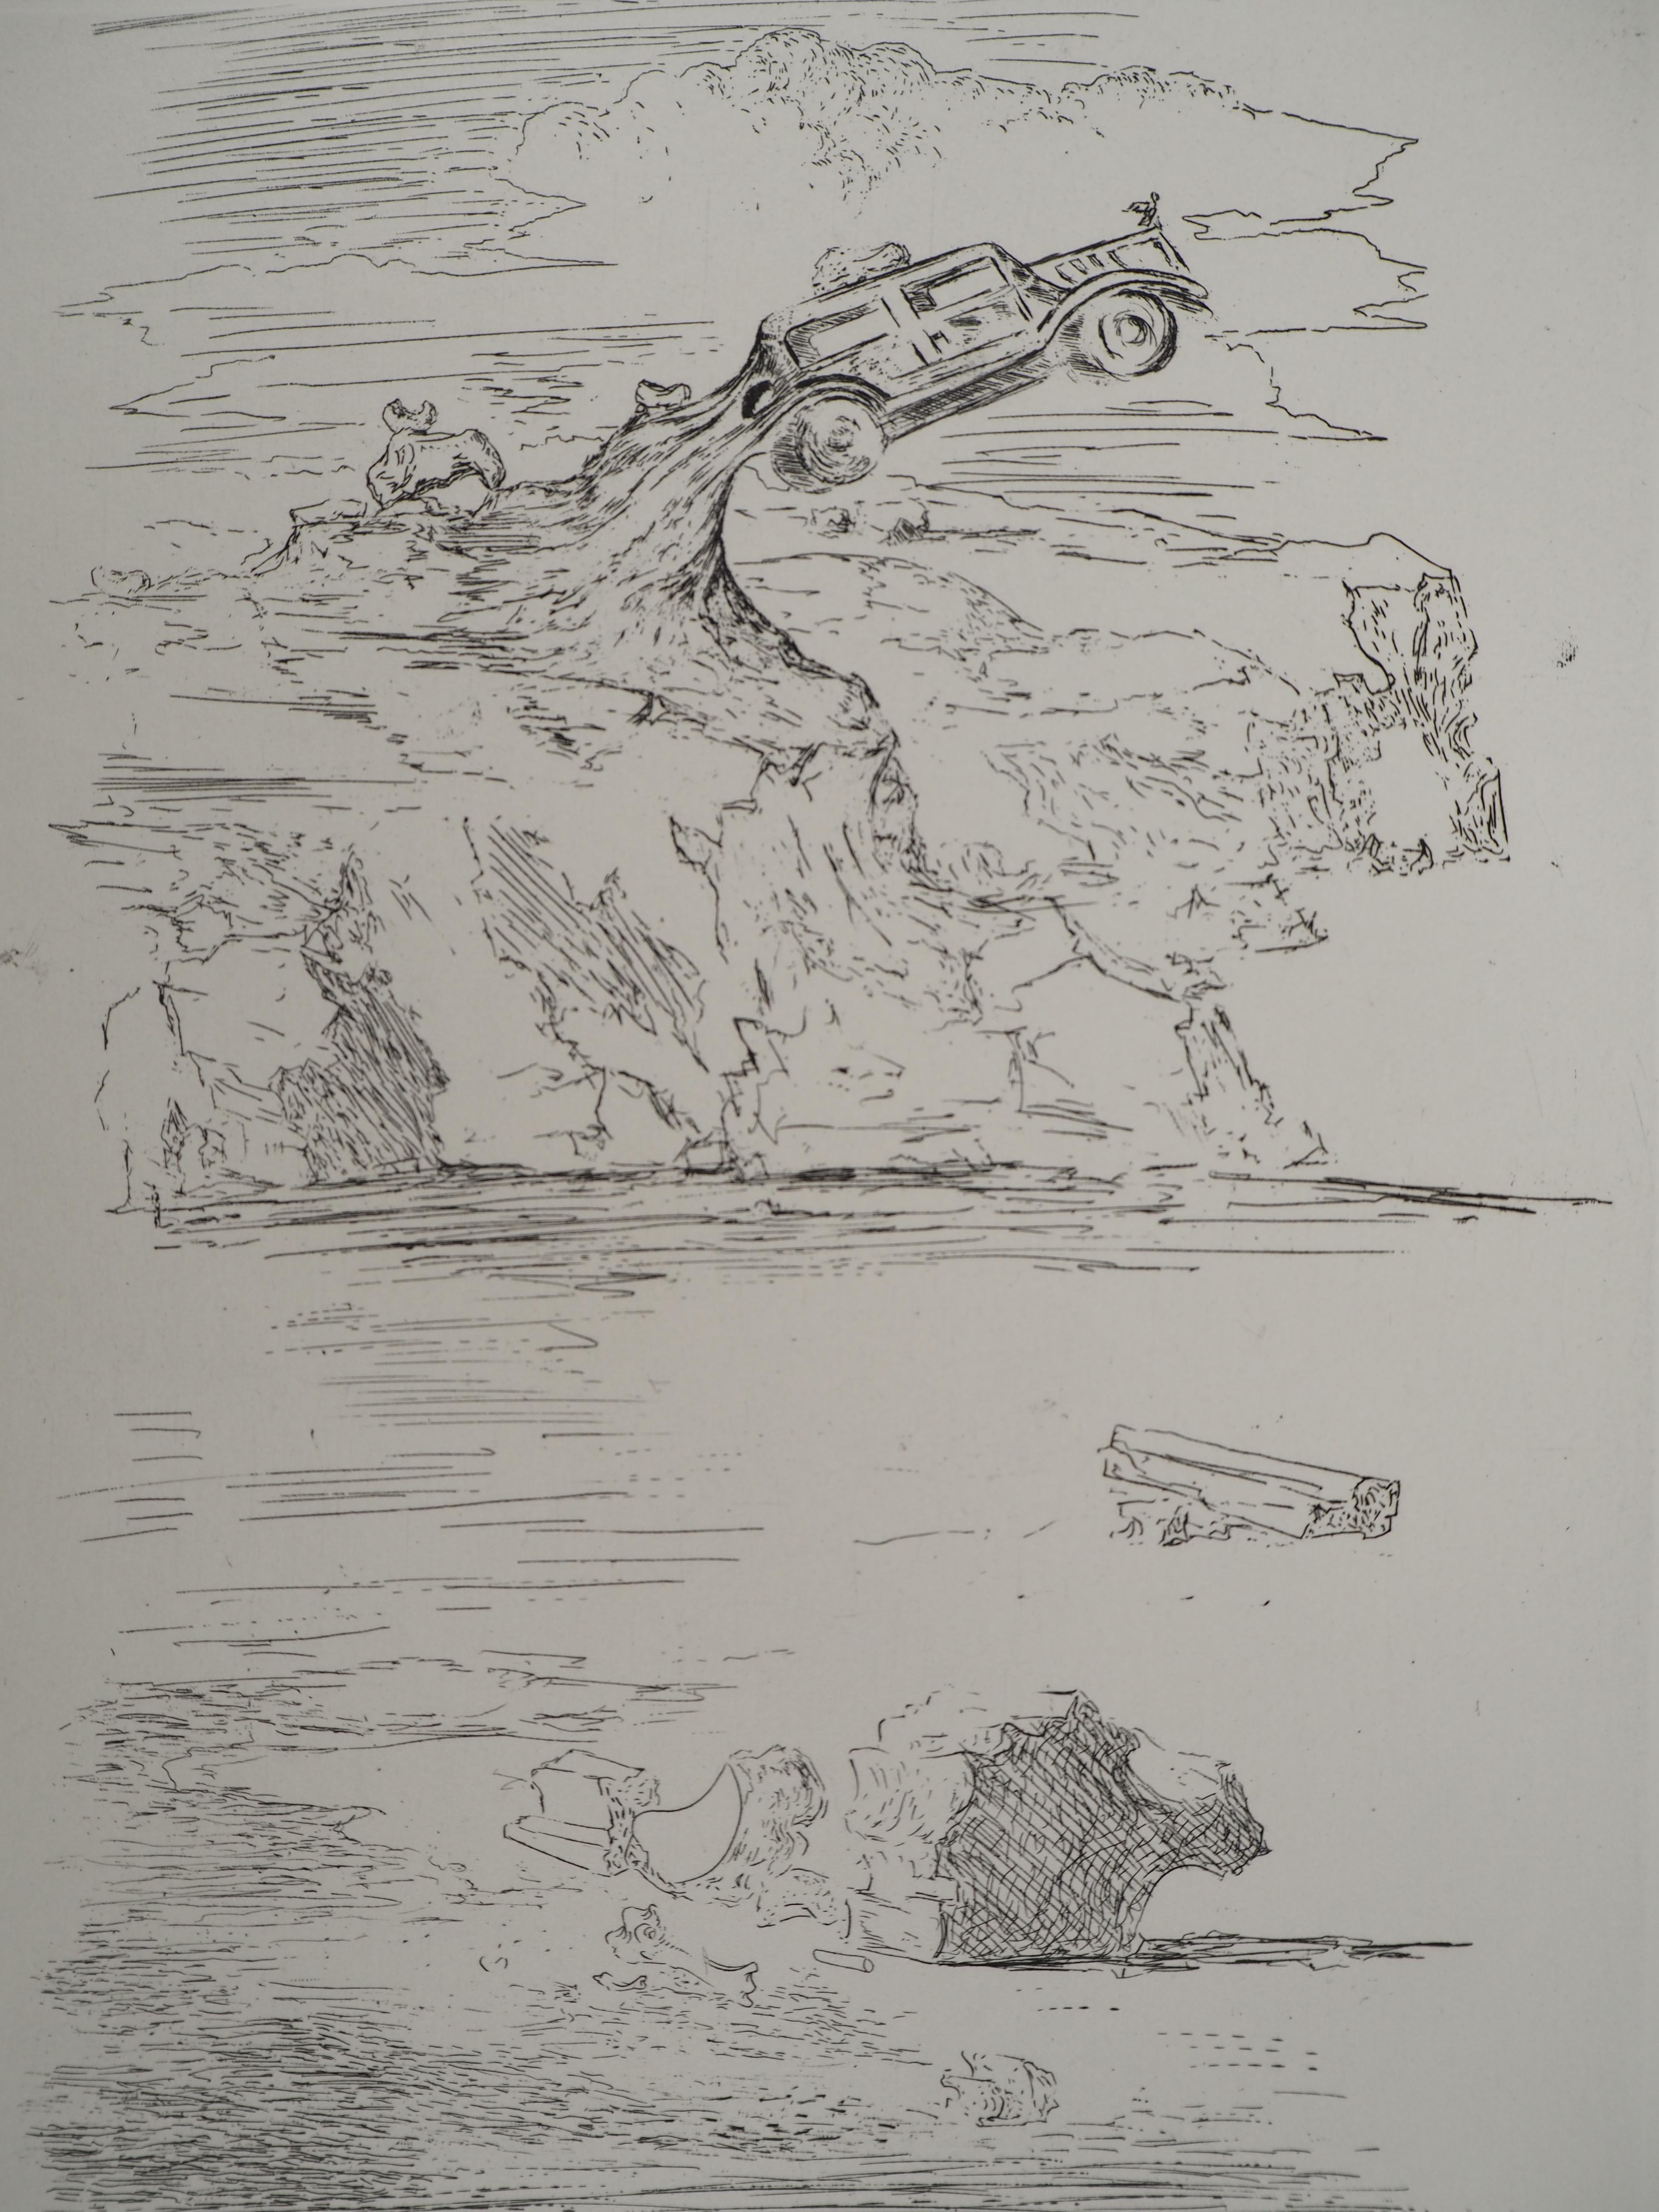 Salvador Dali
Ice-cold landscape with the Rolls Royce, 1975

Original etching 
Signed in pencil 
Limited to 100 copies (Here numbered 52)
On Arches vellum  32.5 x 25 cm (c. 12.7 x 9.8 in)

REFERENCES :
- Catalog raisonne Field #34-2
- Catalog